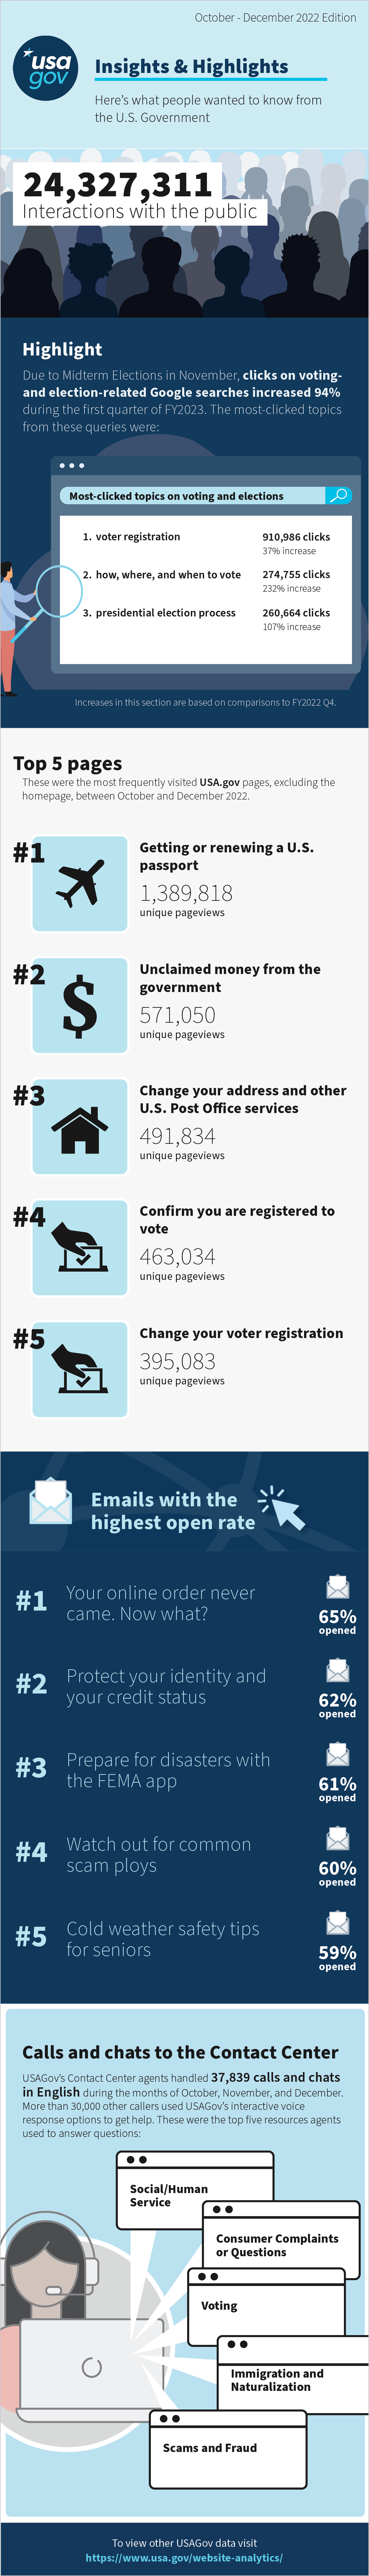 USAGov Insights and Highlights Infographic